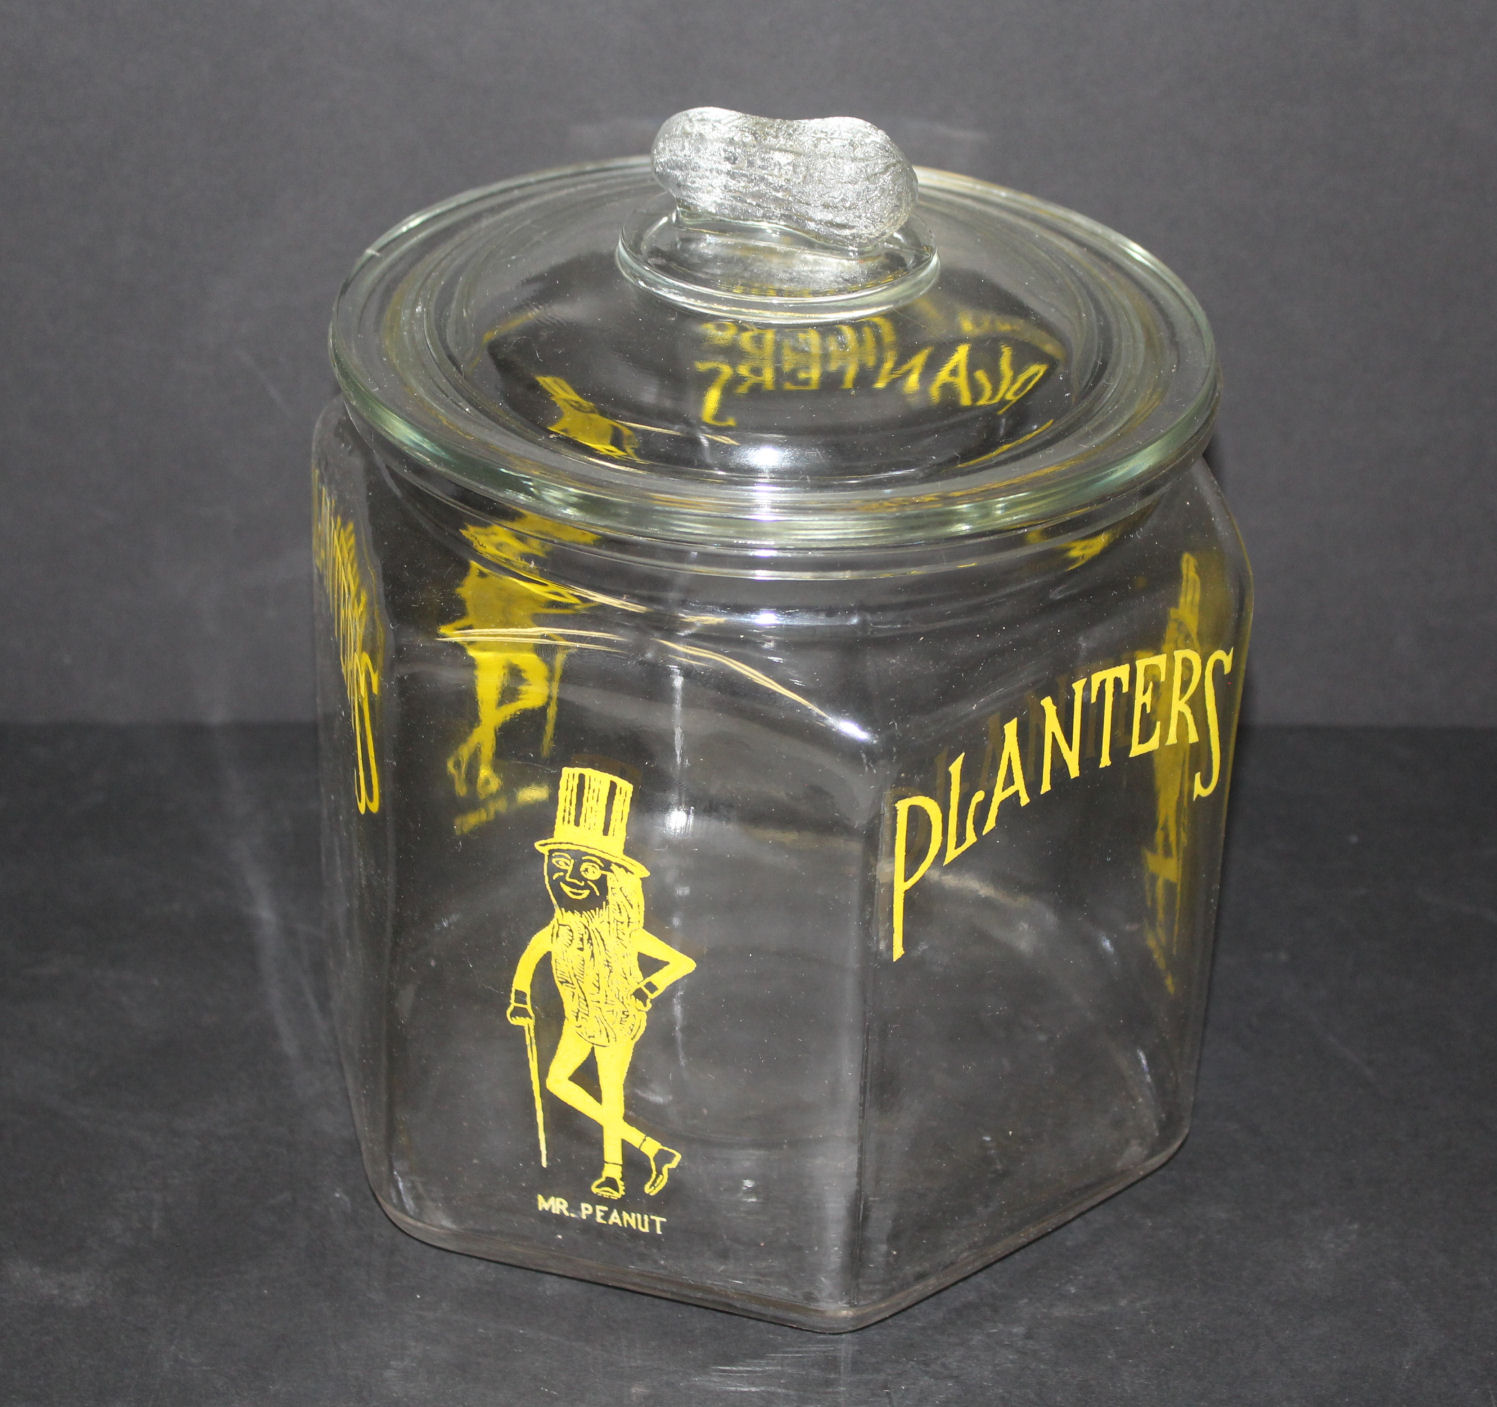 Bargain John's Antiques | Planters Peanuts Advertising Country Store Glass Hexagon ...